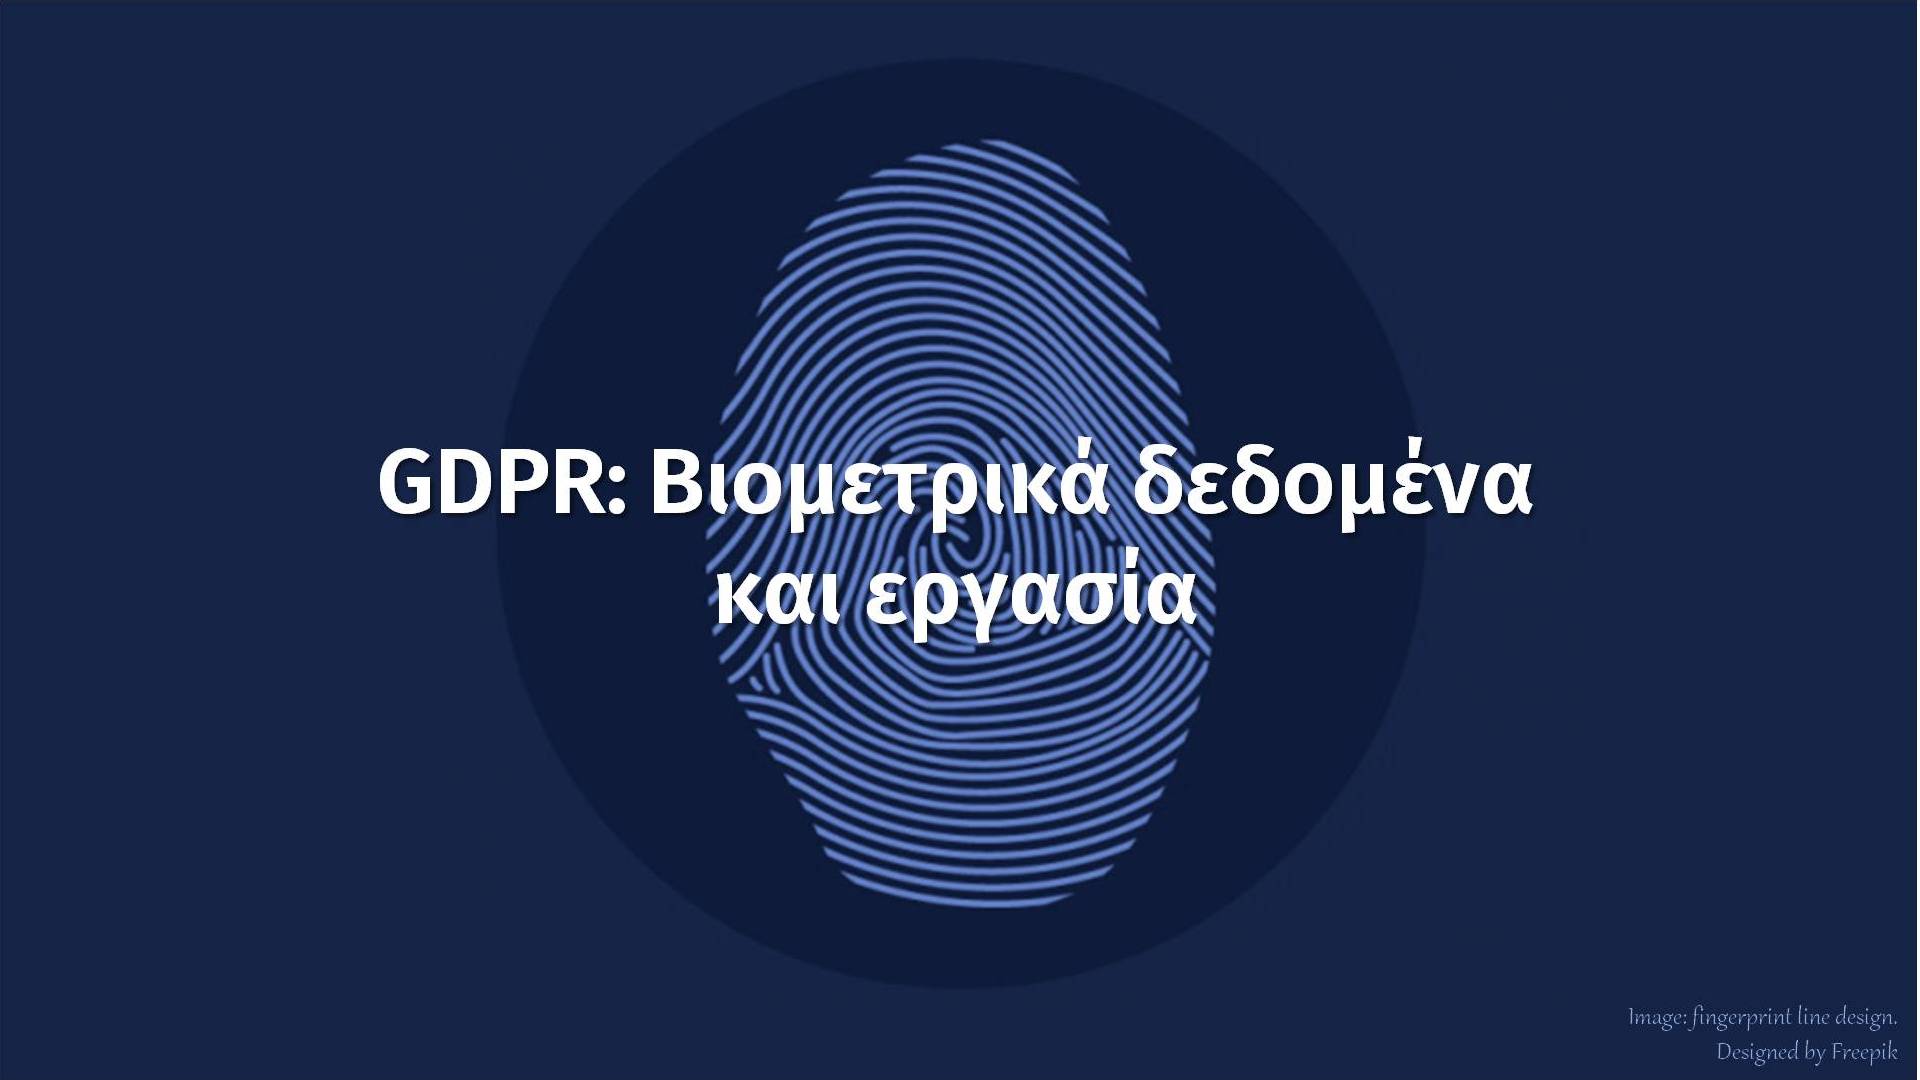 GDPR: The next day: Biometric data and employment